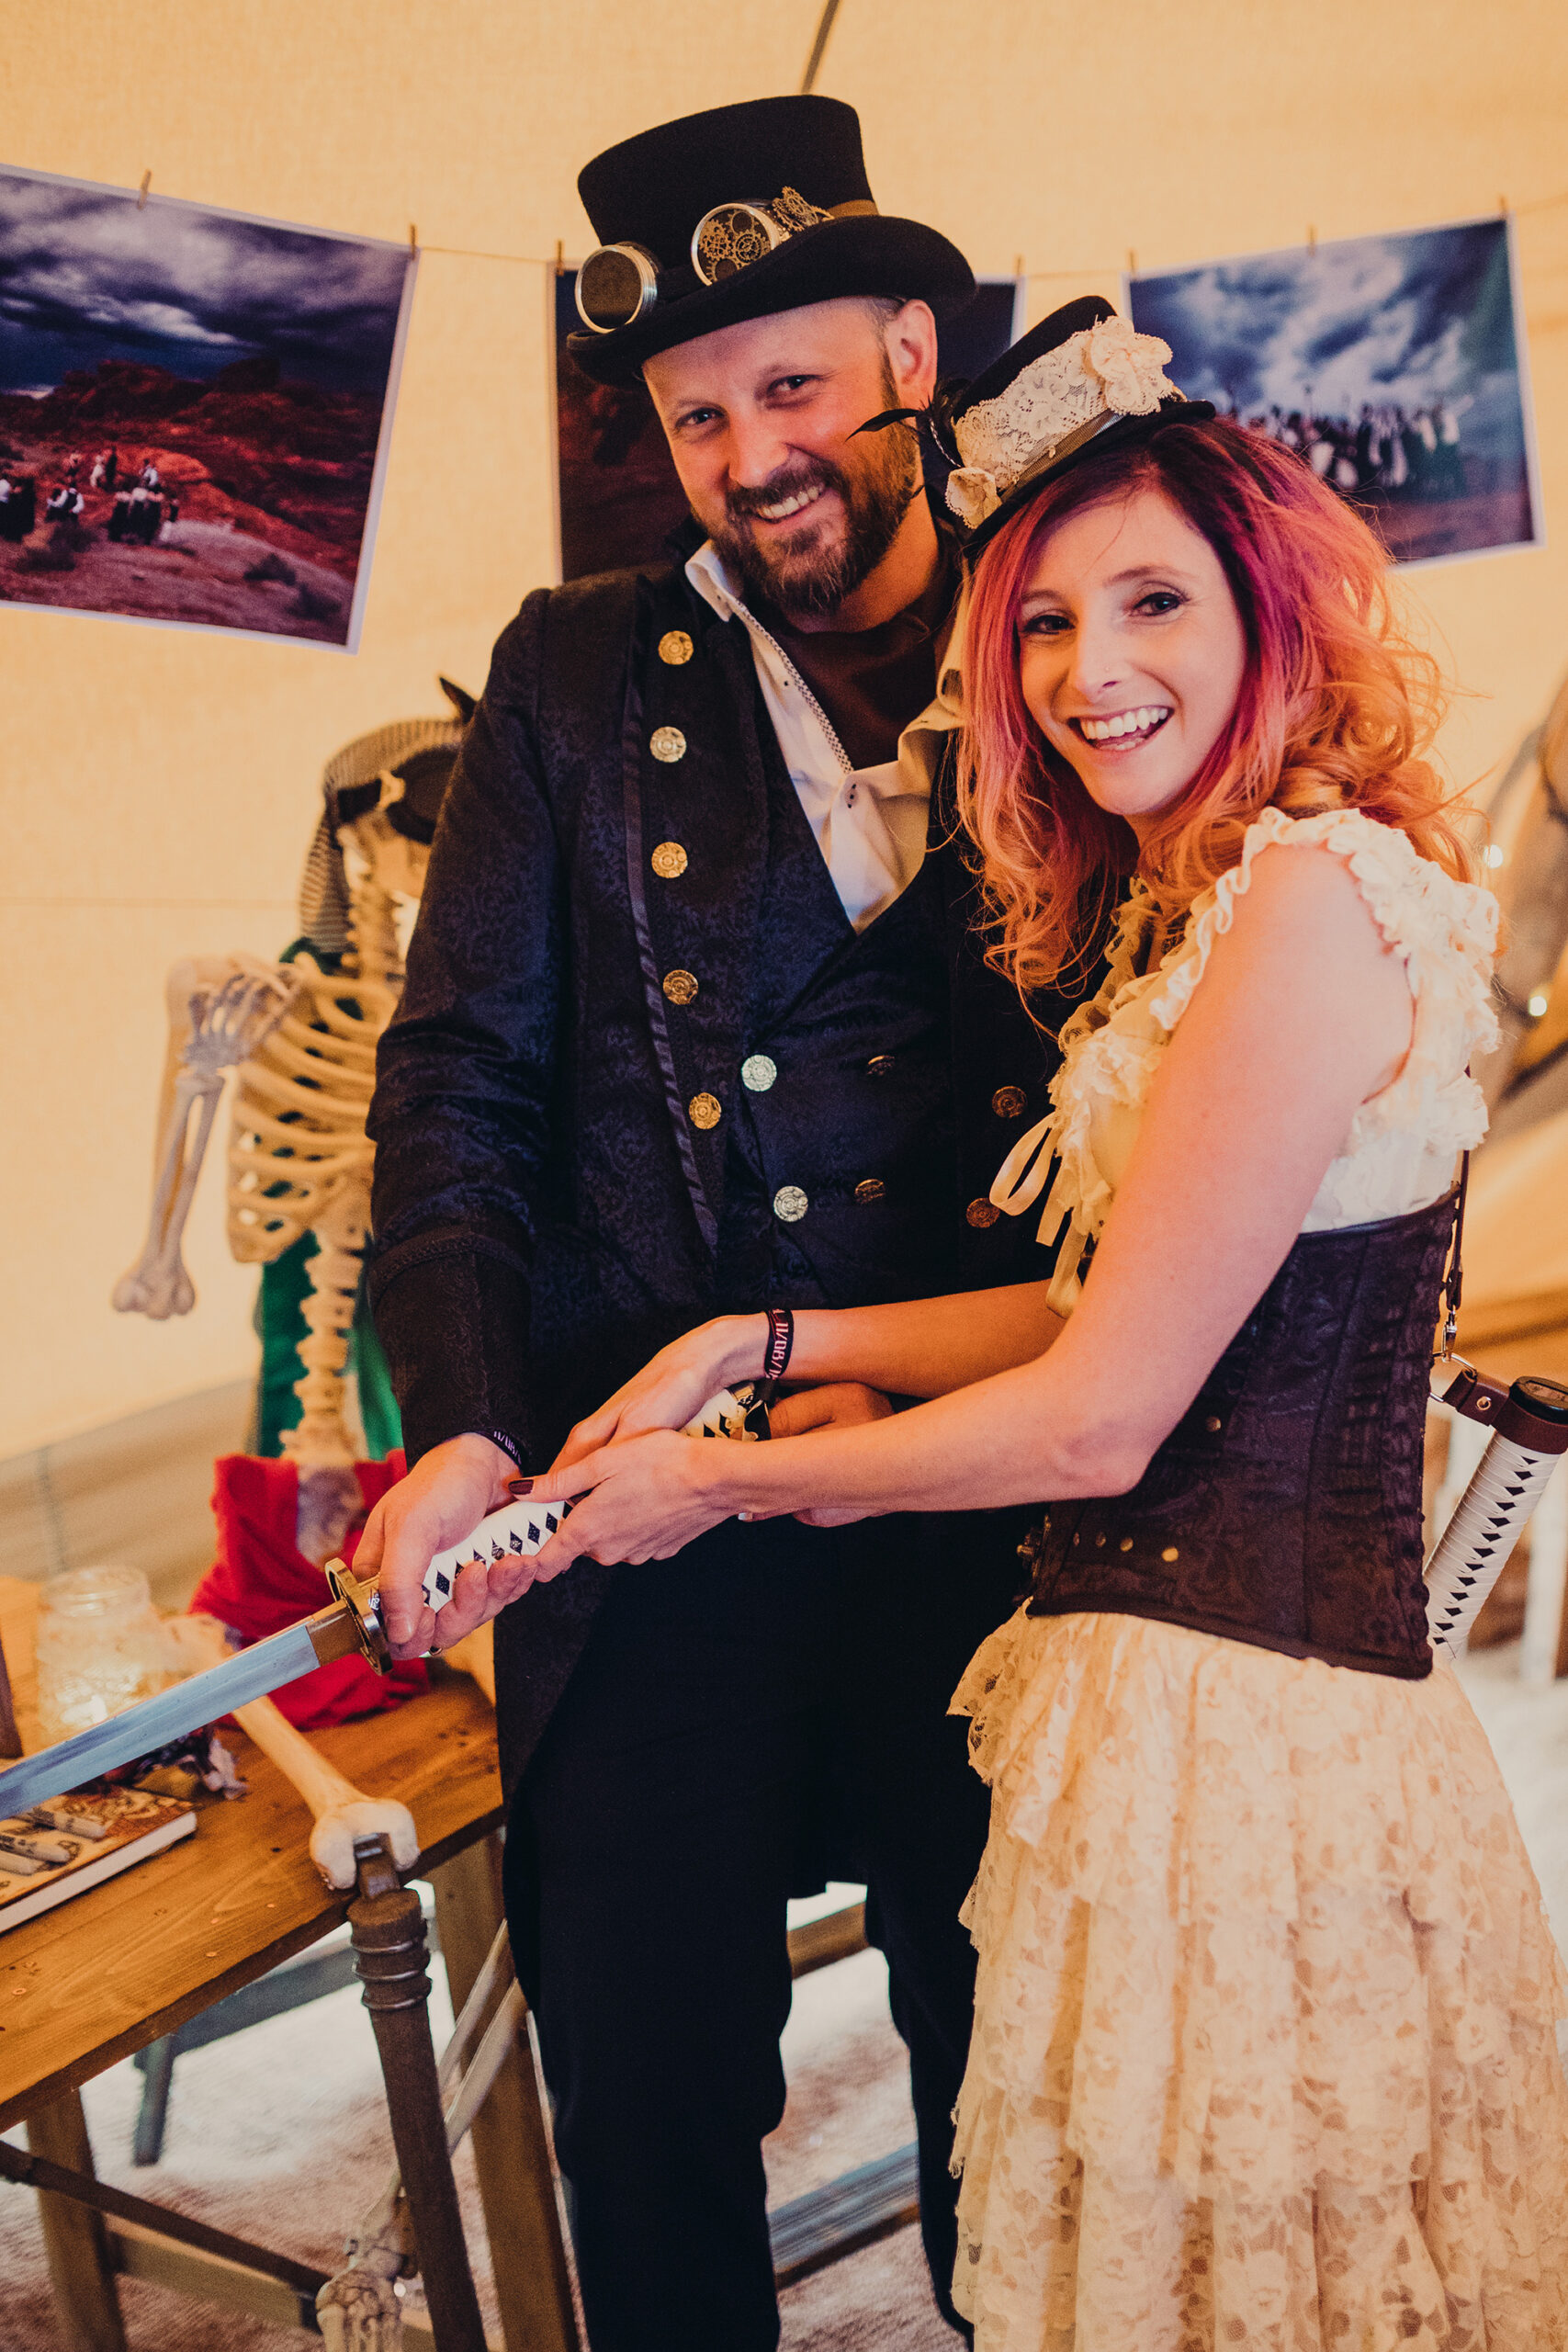 April Rien Steampunk Festival Wedding Chelsea Shoesmith Photography SBS 034 scaled